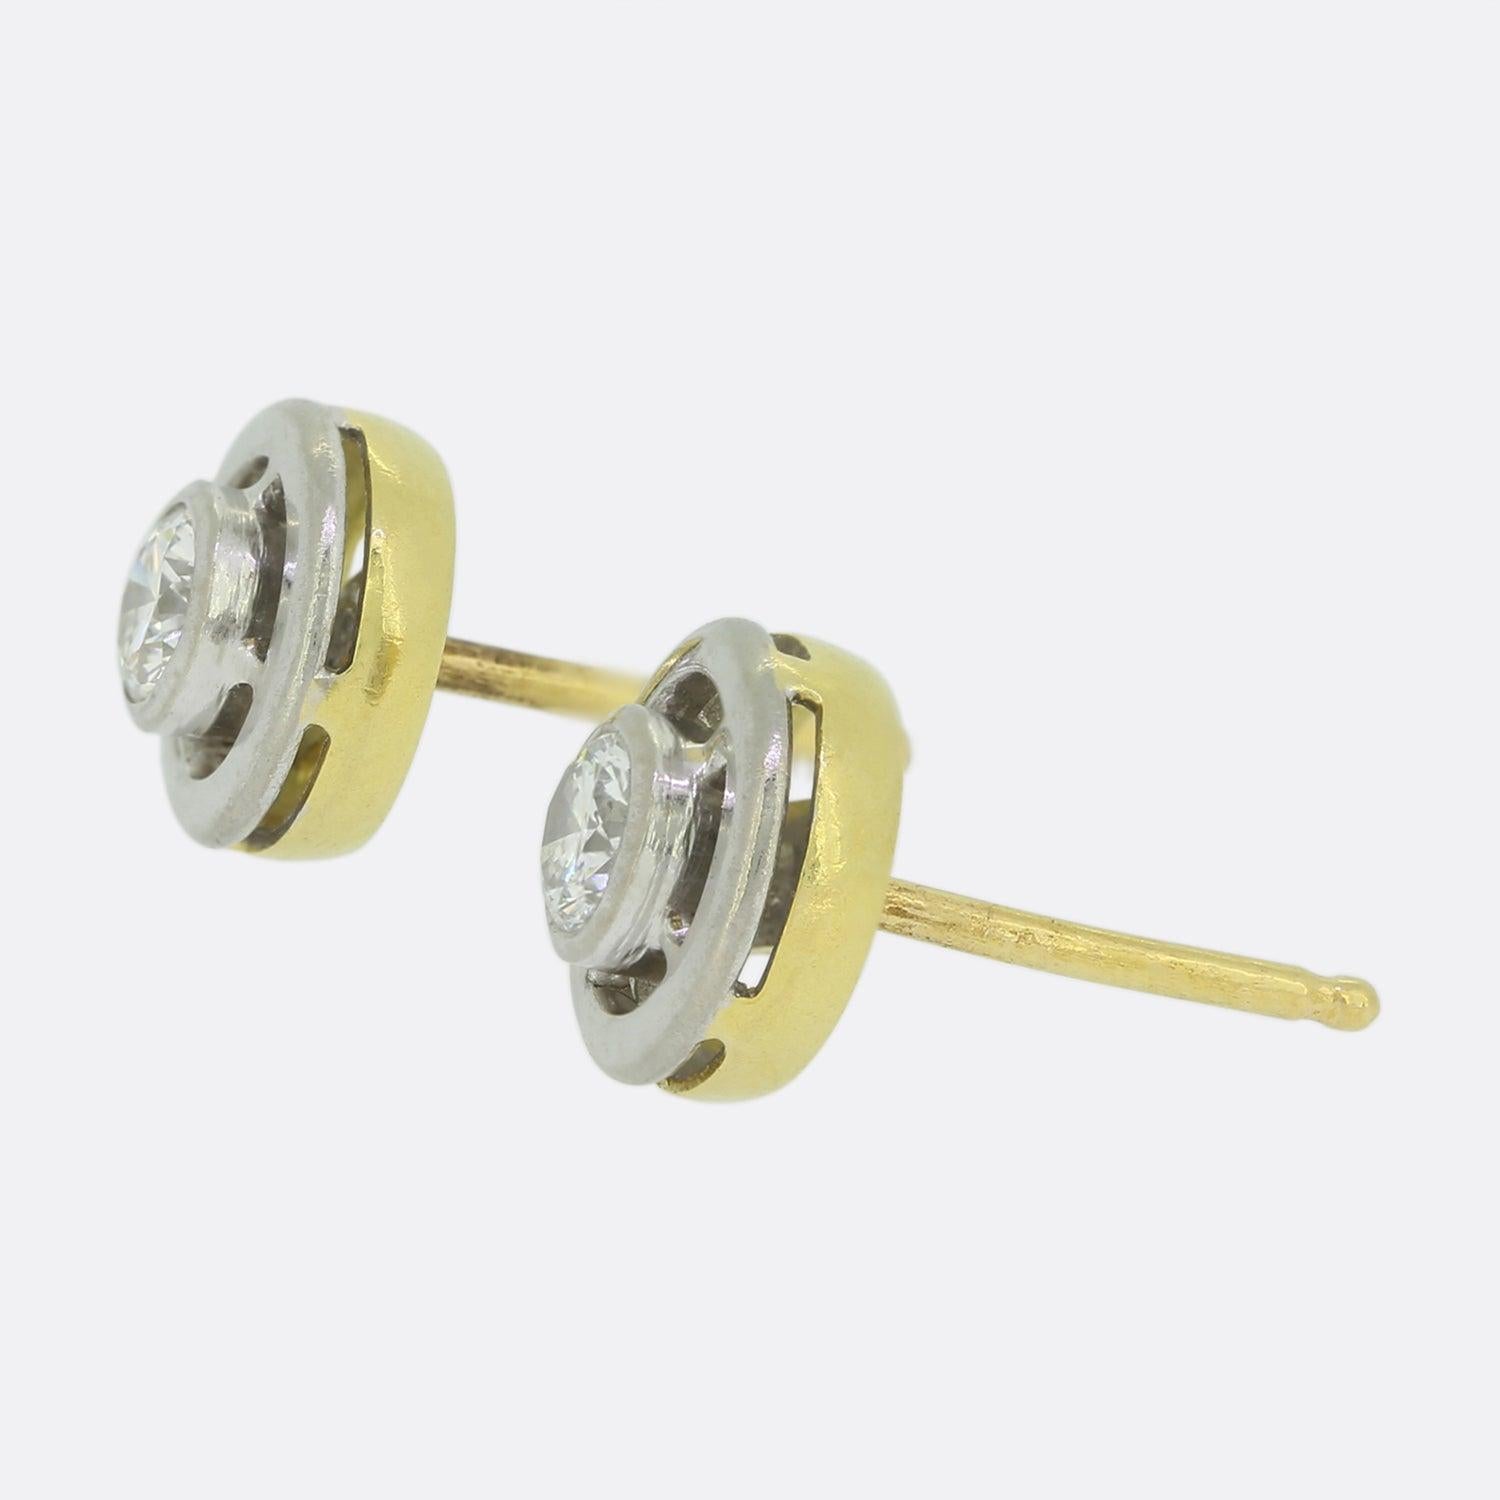 These are a pair of vintage 18ct yellow gold diamond stud earrings. Each earring features a 0.25 carat round brilliant cut diamond. Although the back of the earrings and posts are 18ct yellow gold the diamonds sit in a white gold rub-over mount to